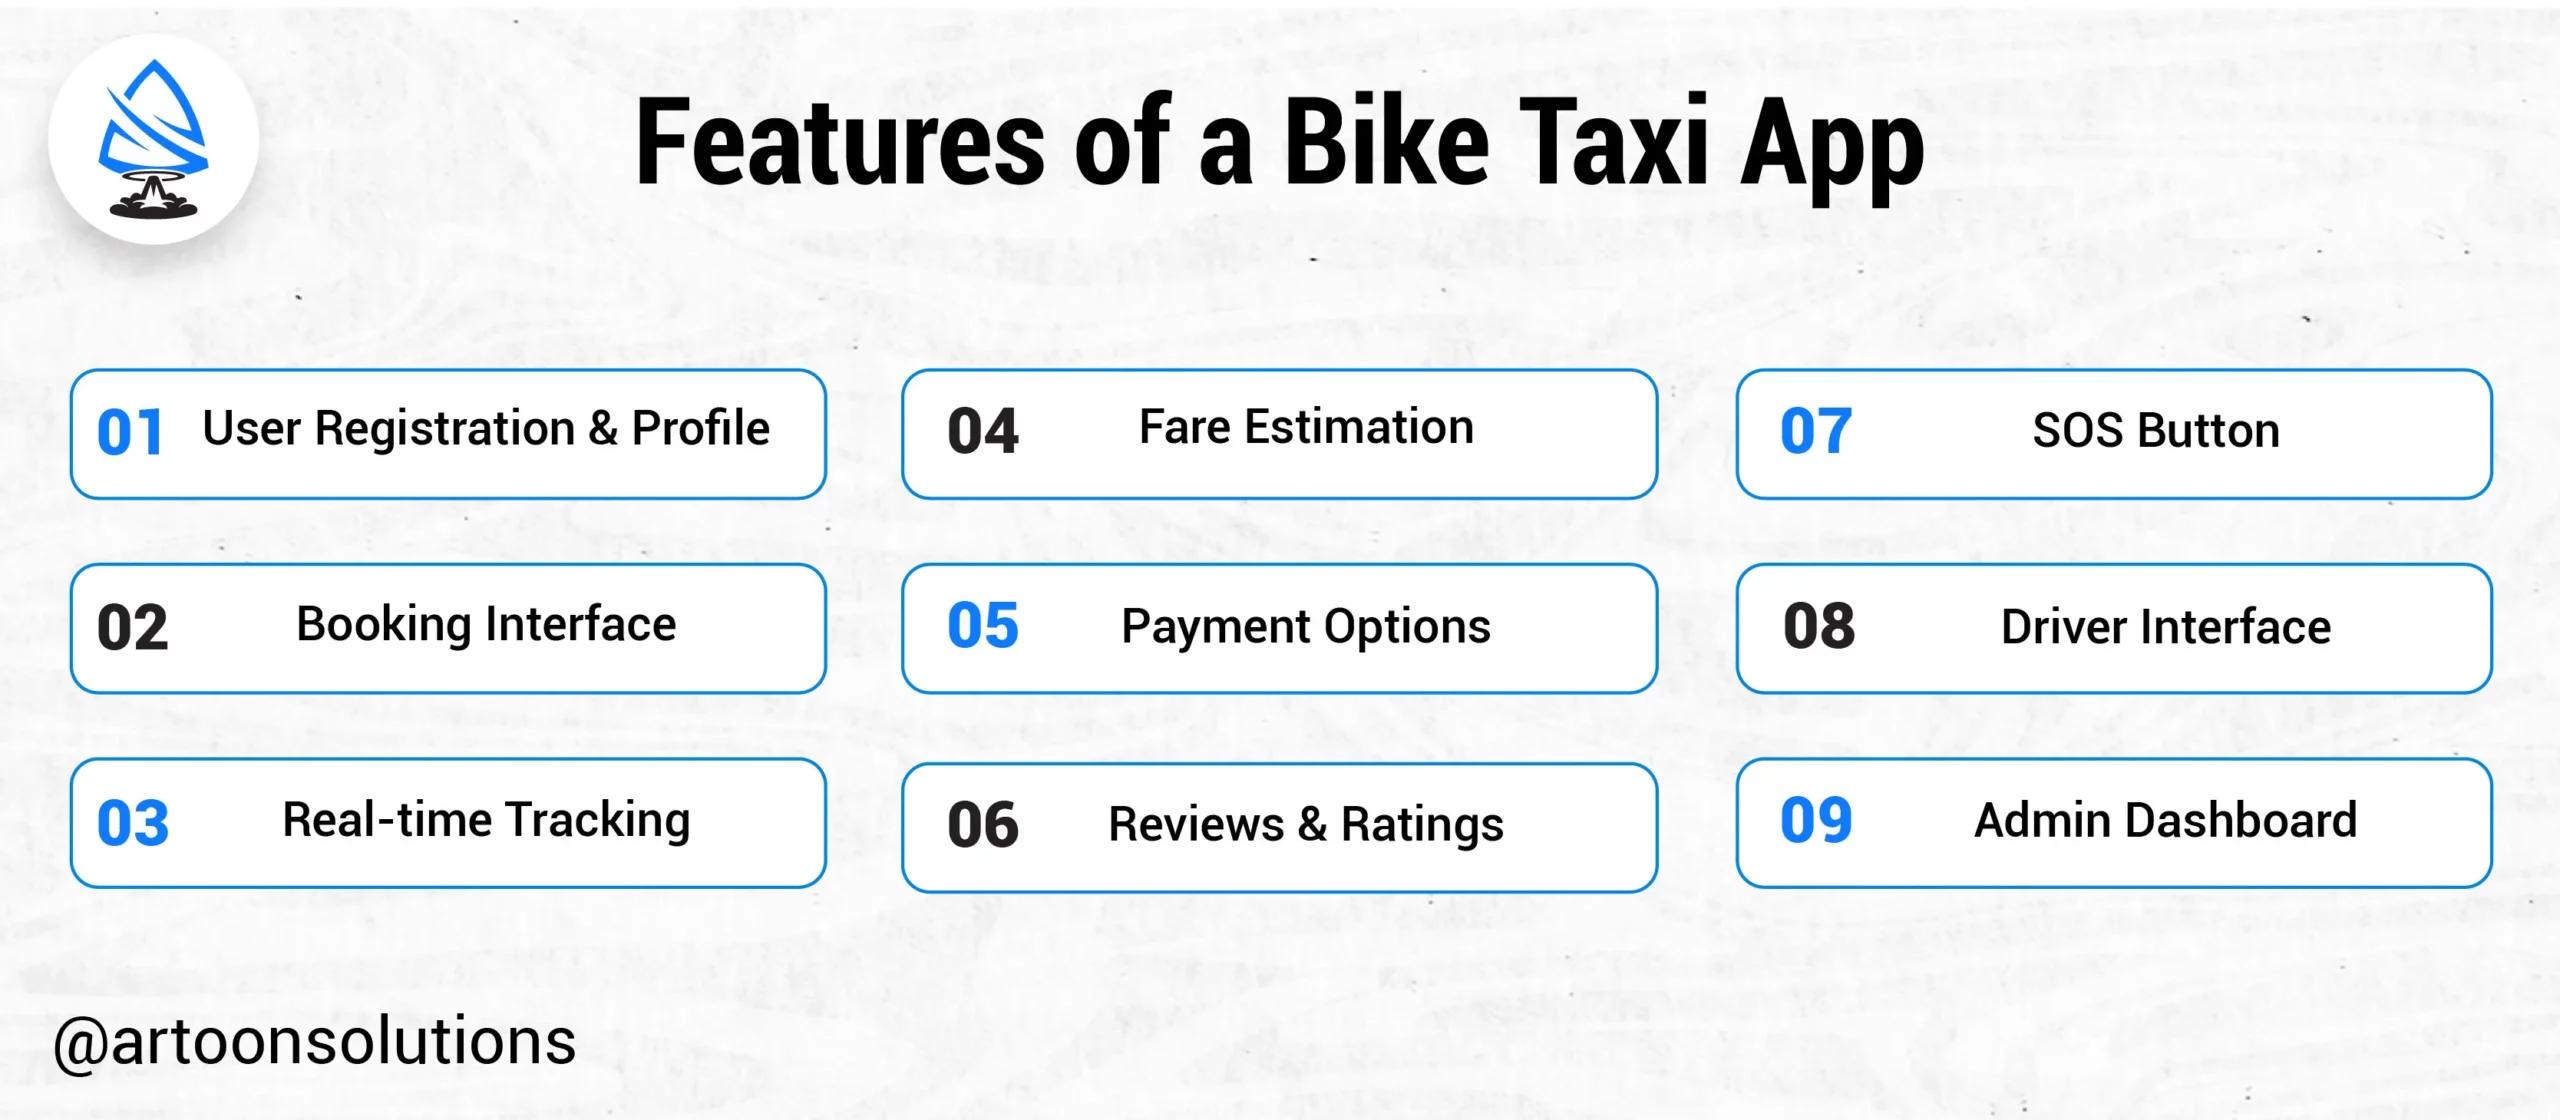 Features of a Bike Taxi App